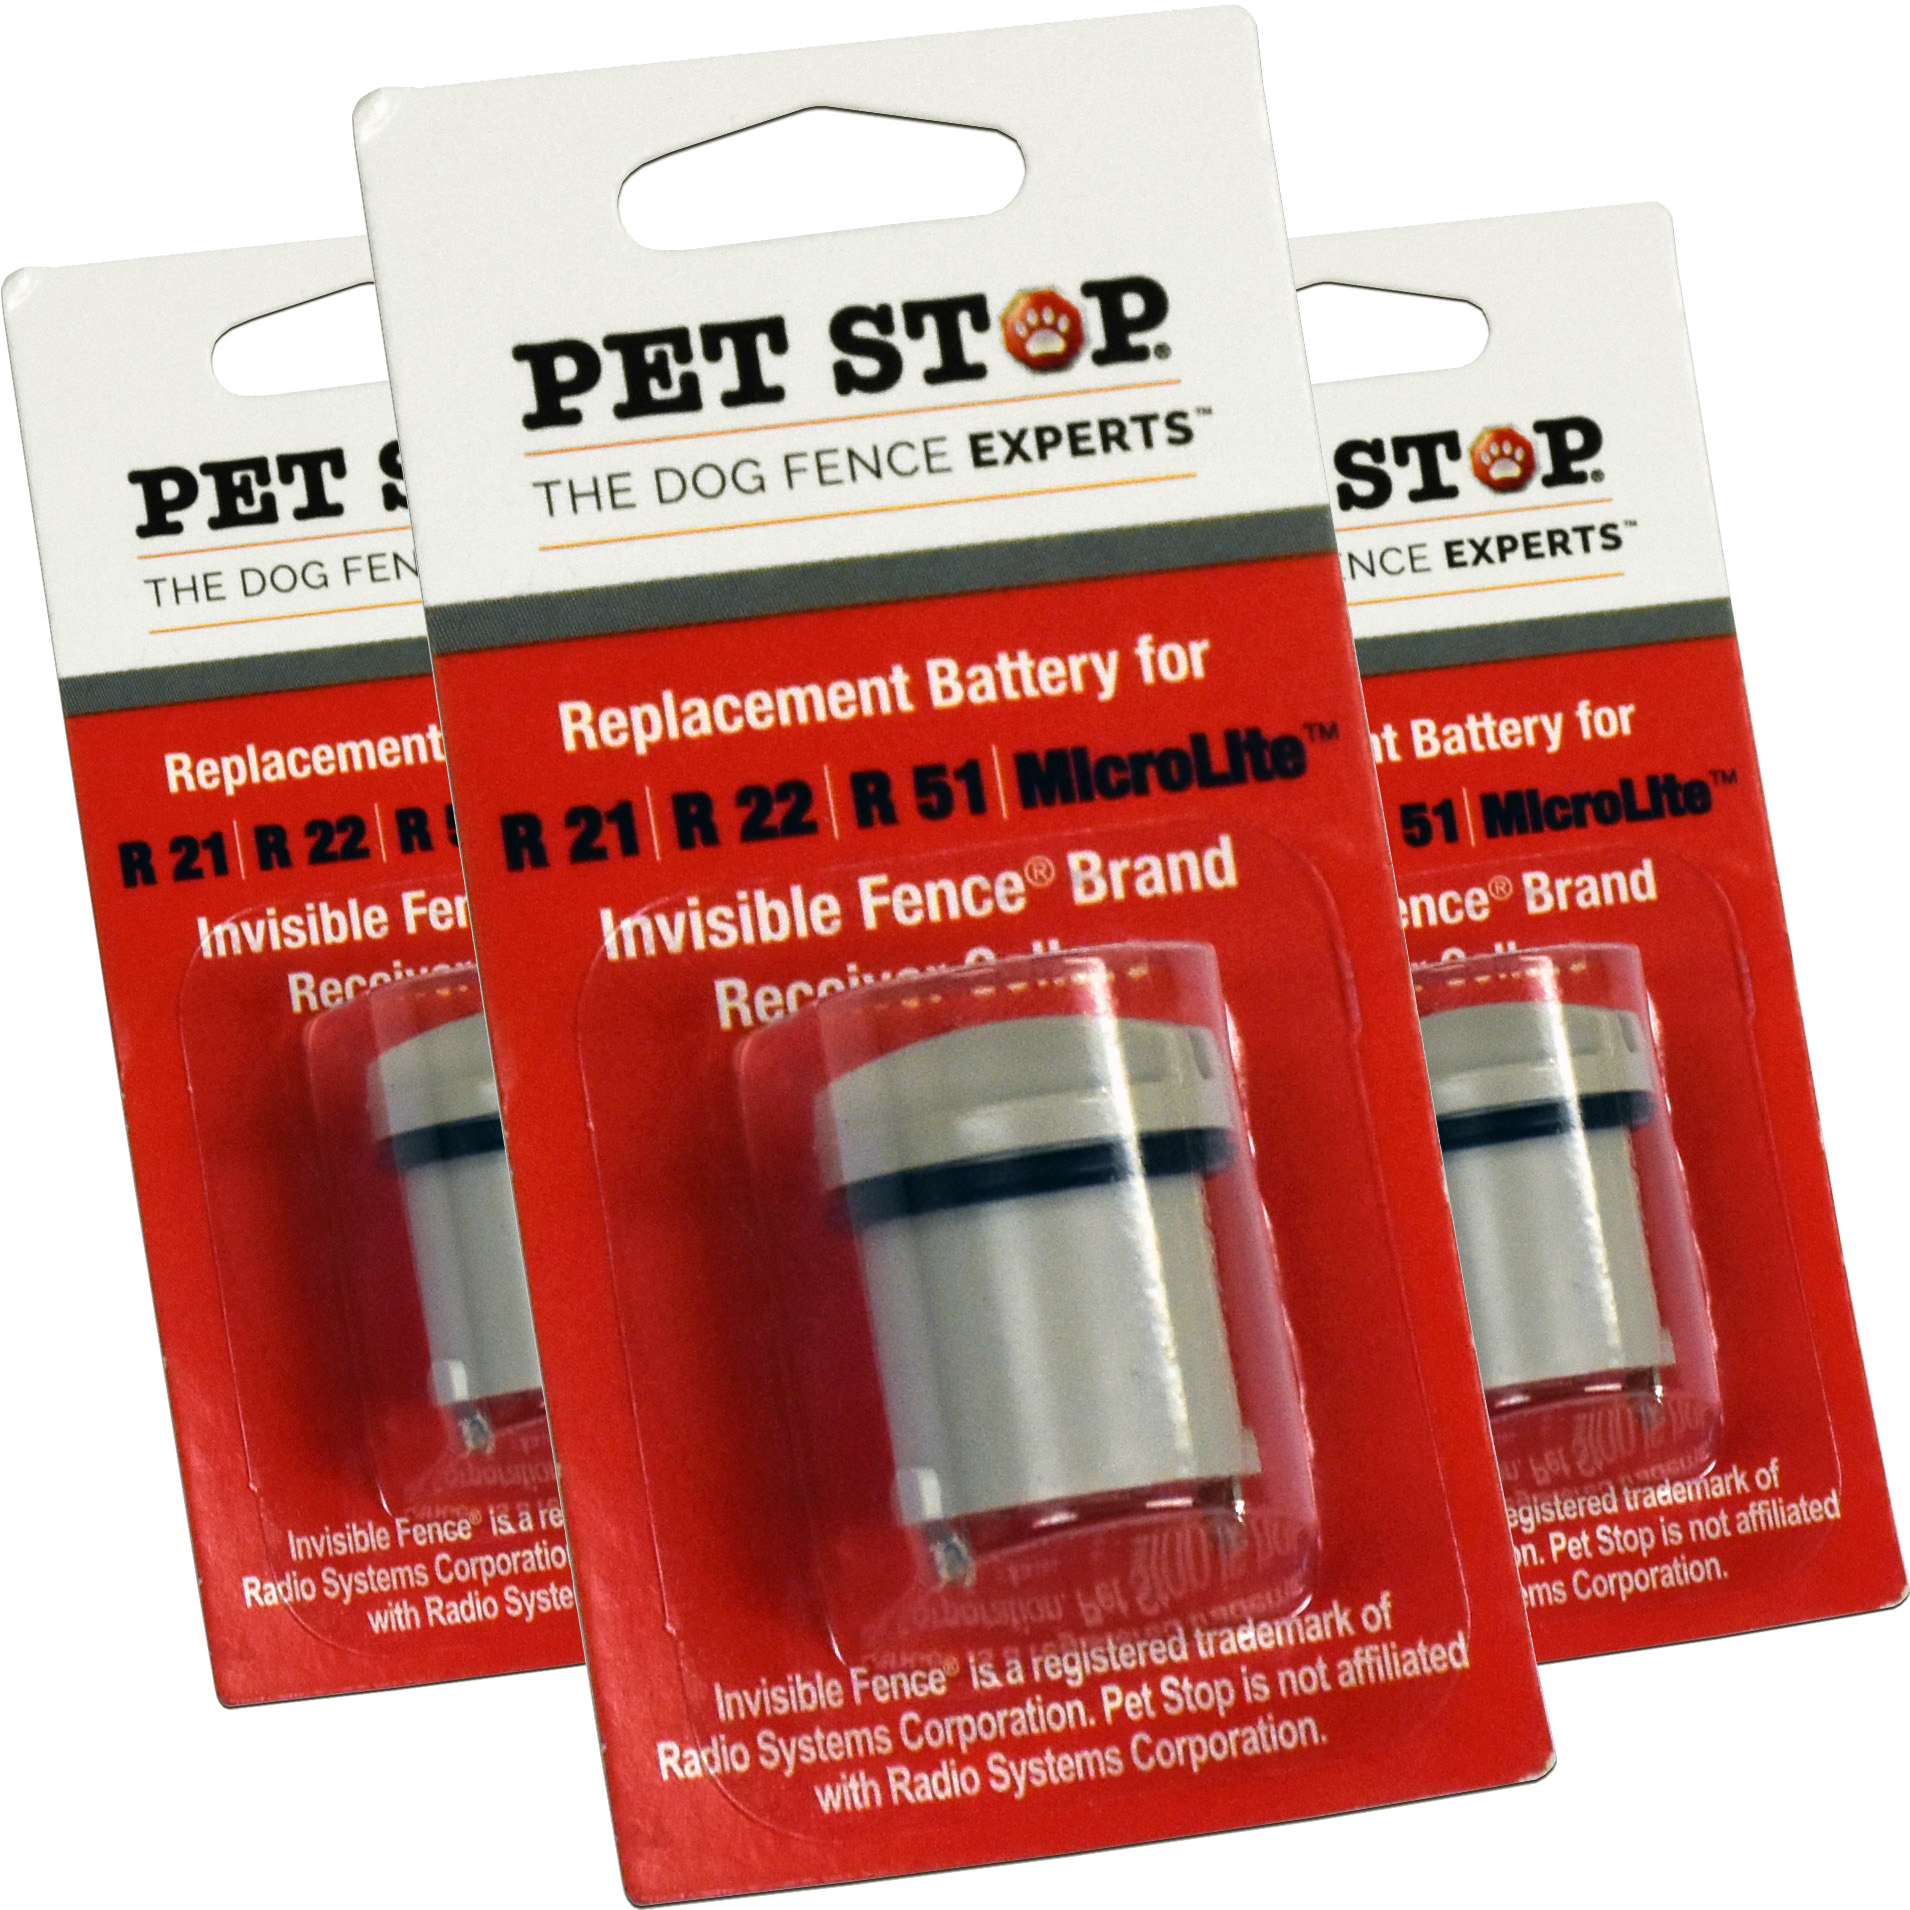  Invisible Fence Collar Replacement Battery - New Improved  Ultra Life Battery For Invisible Fence Brand Electric Dog Fence Collars